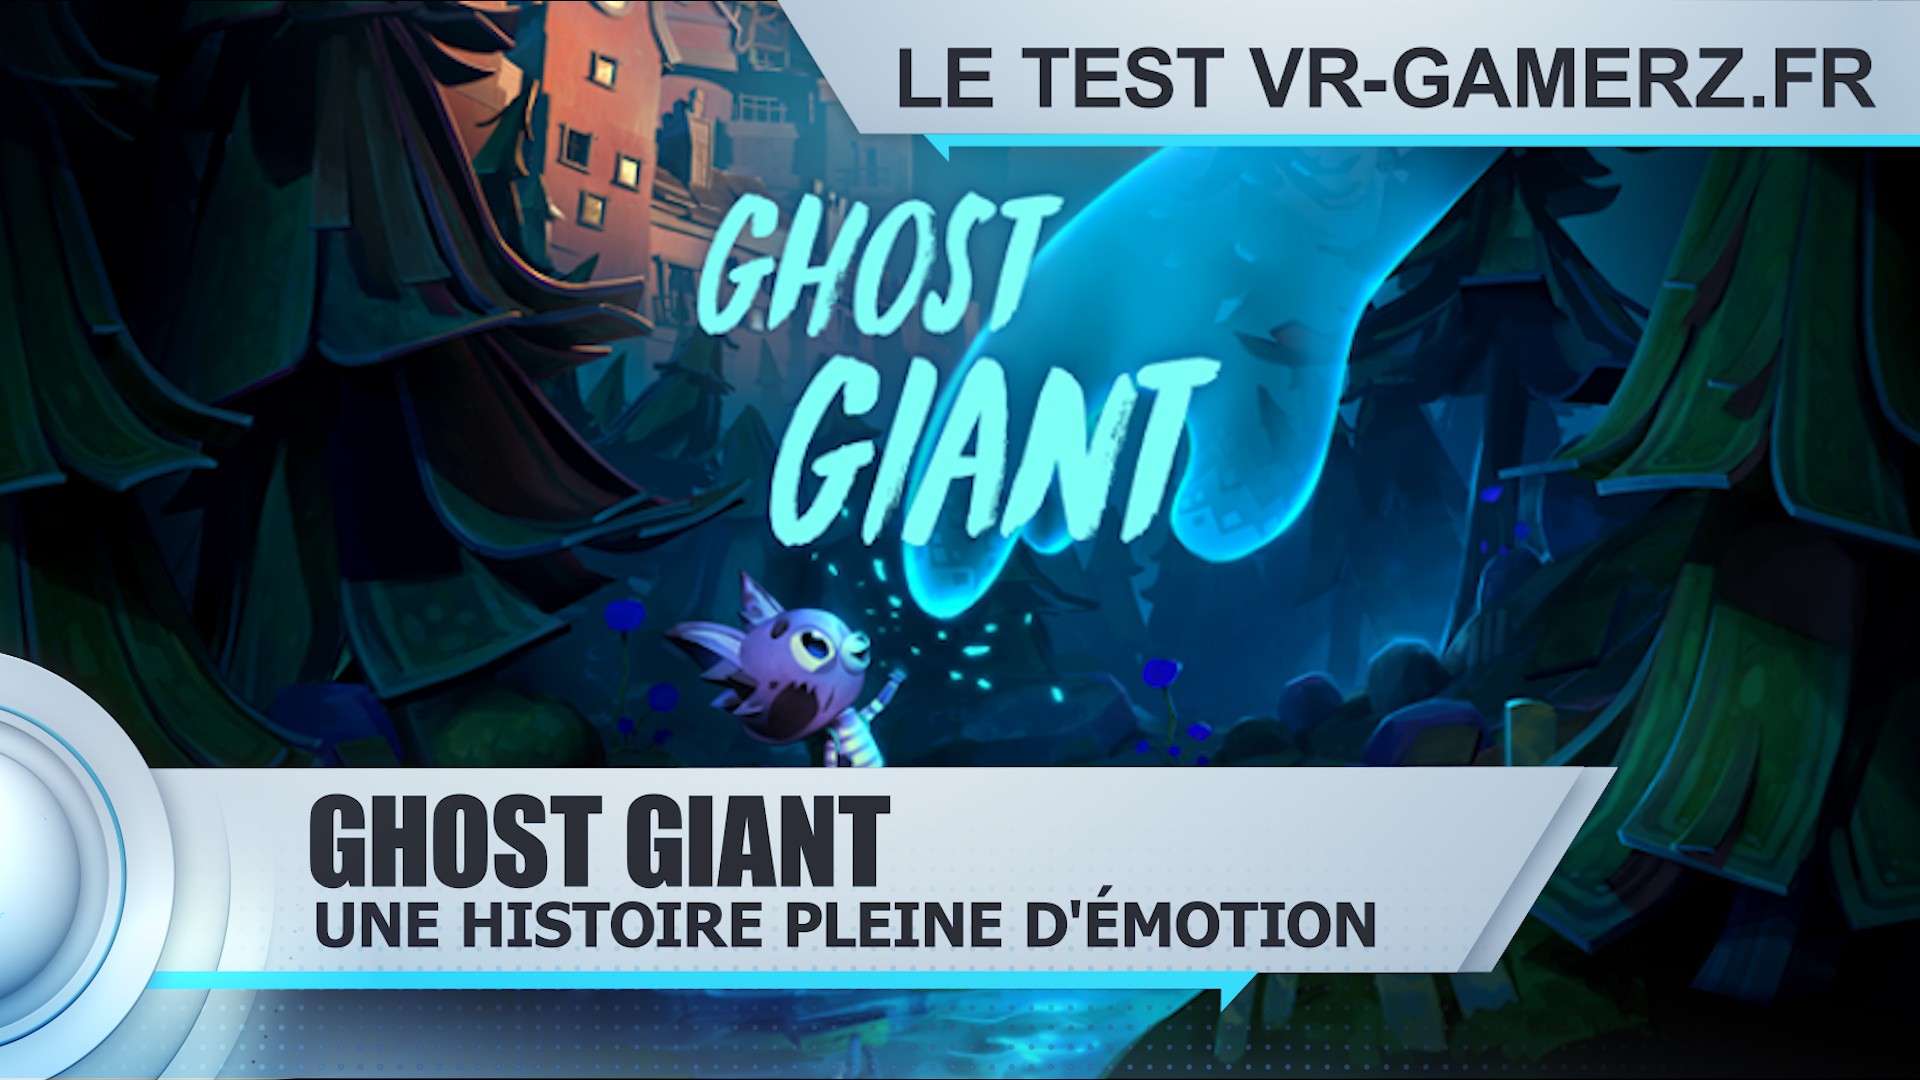 free download ghost giant oculus quest